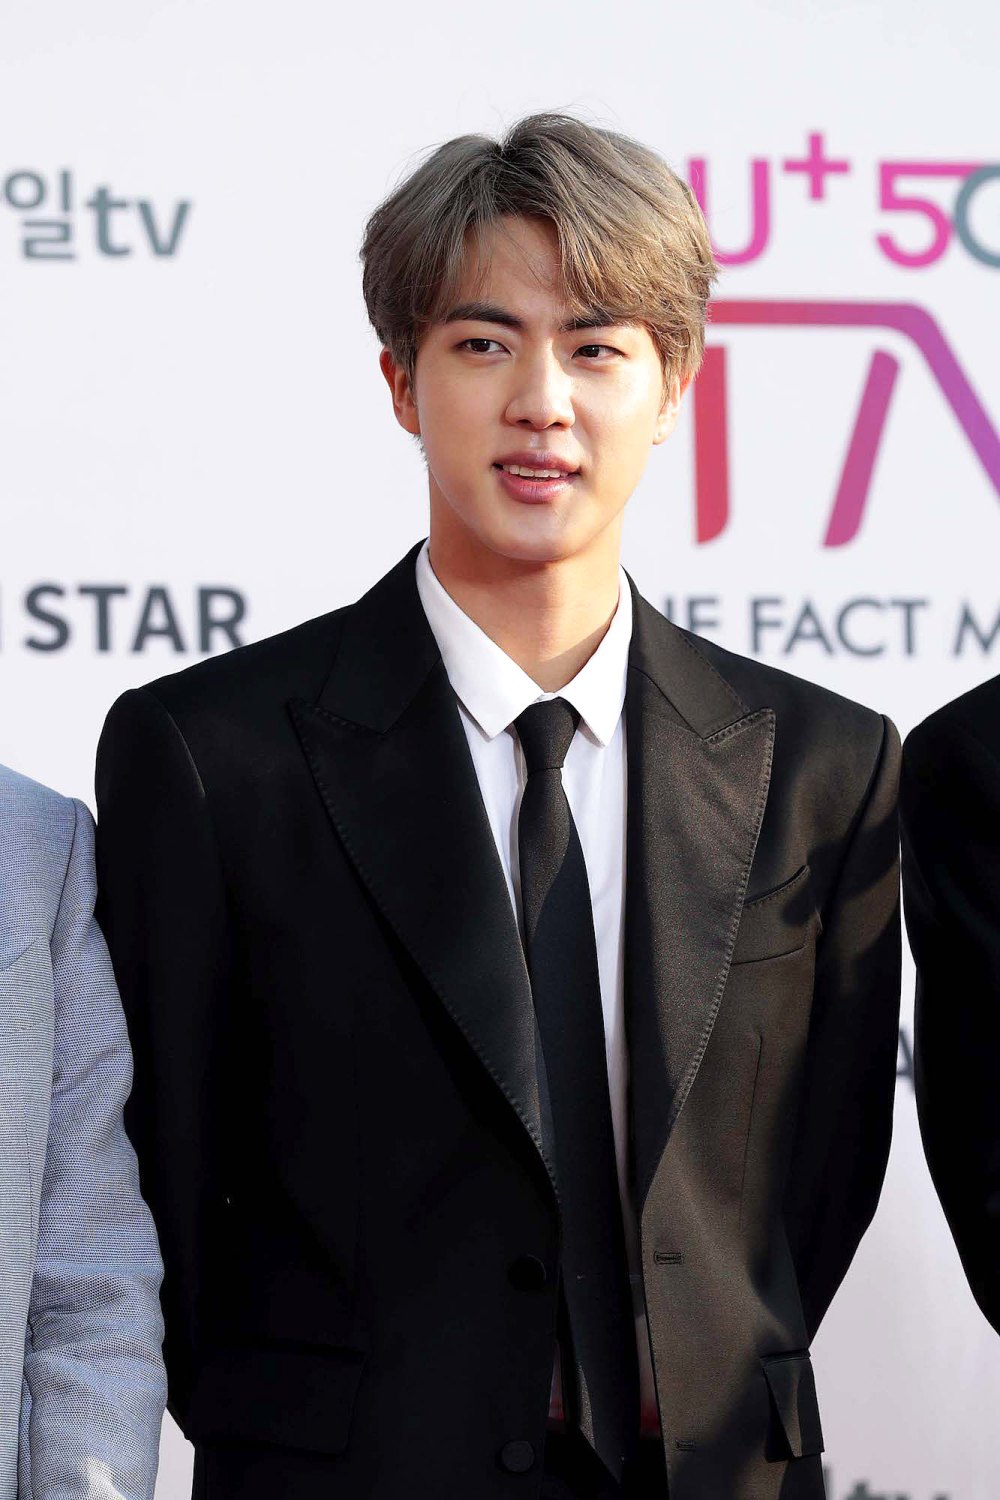 BTS Member Jin to Serve as Olympics Torchbearer After Completing Military Service